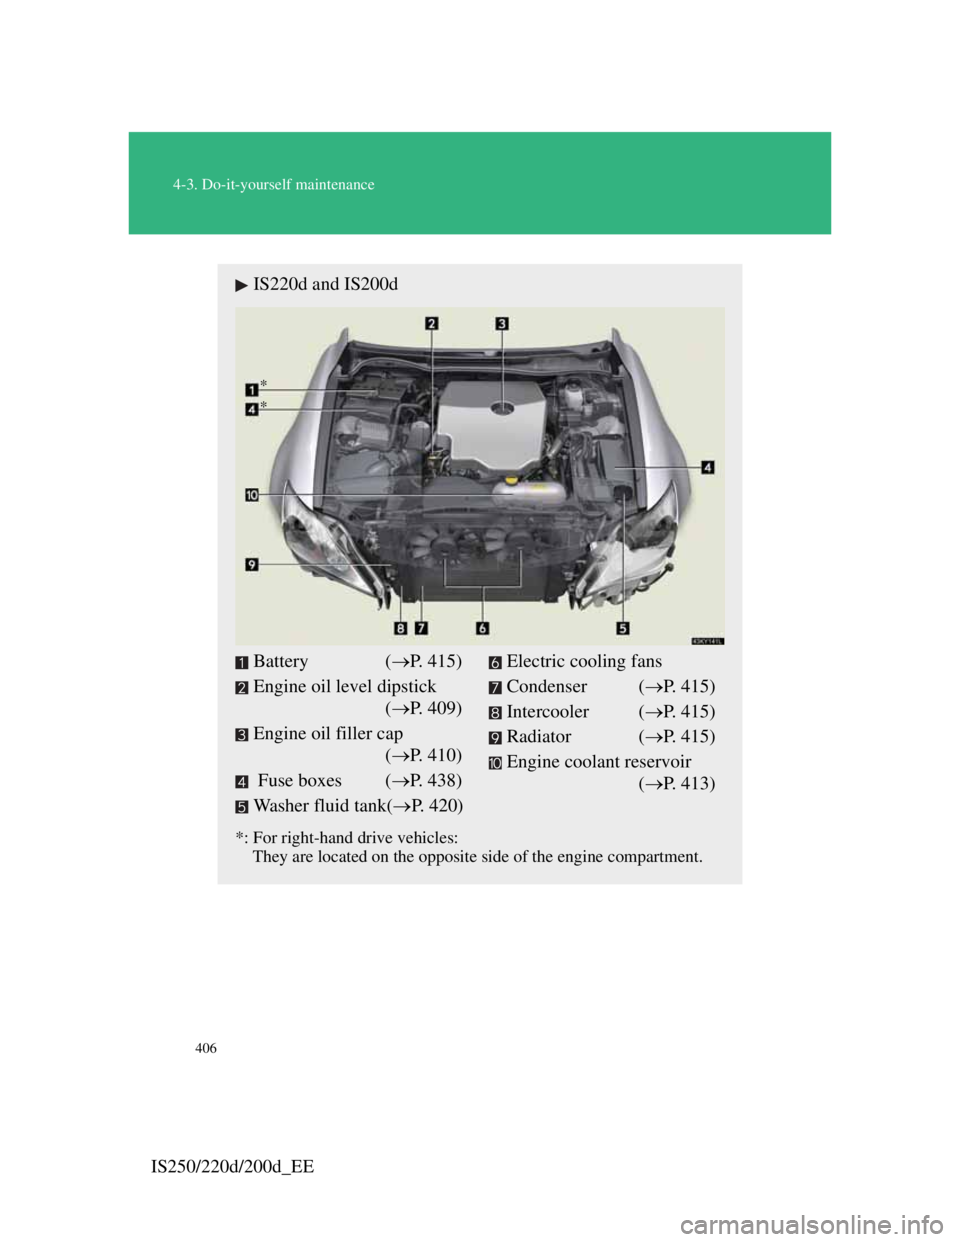 Lexus IS220d 2012  Owners Manual 406
4-3. Do-it-yourself maintenance
IS250/220d/200d_EE
IS220d and IS200d
*: For right-hand drive vehicles: 
    They are located on the opposite side of the engine compartment.
Battery (P. 415)
Eng